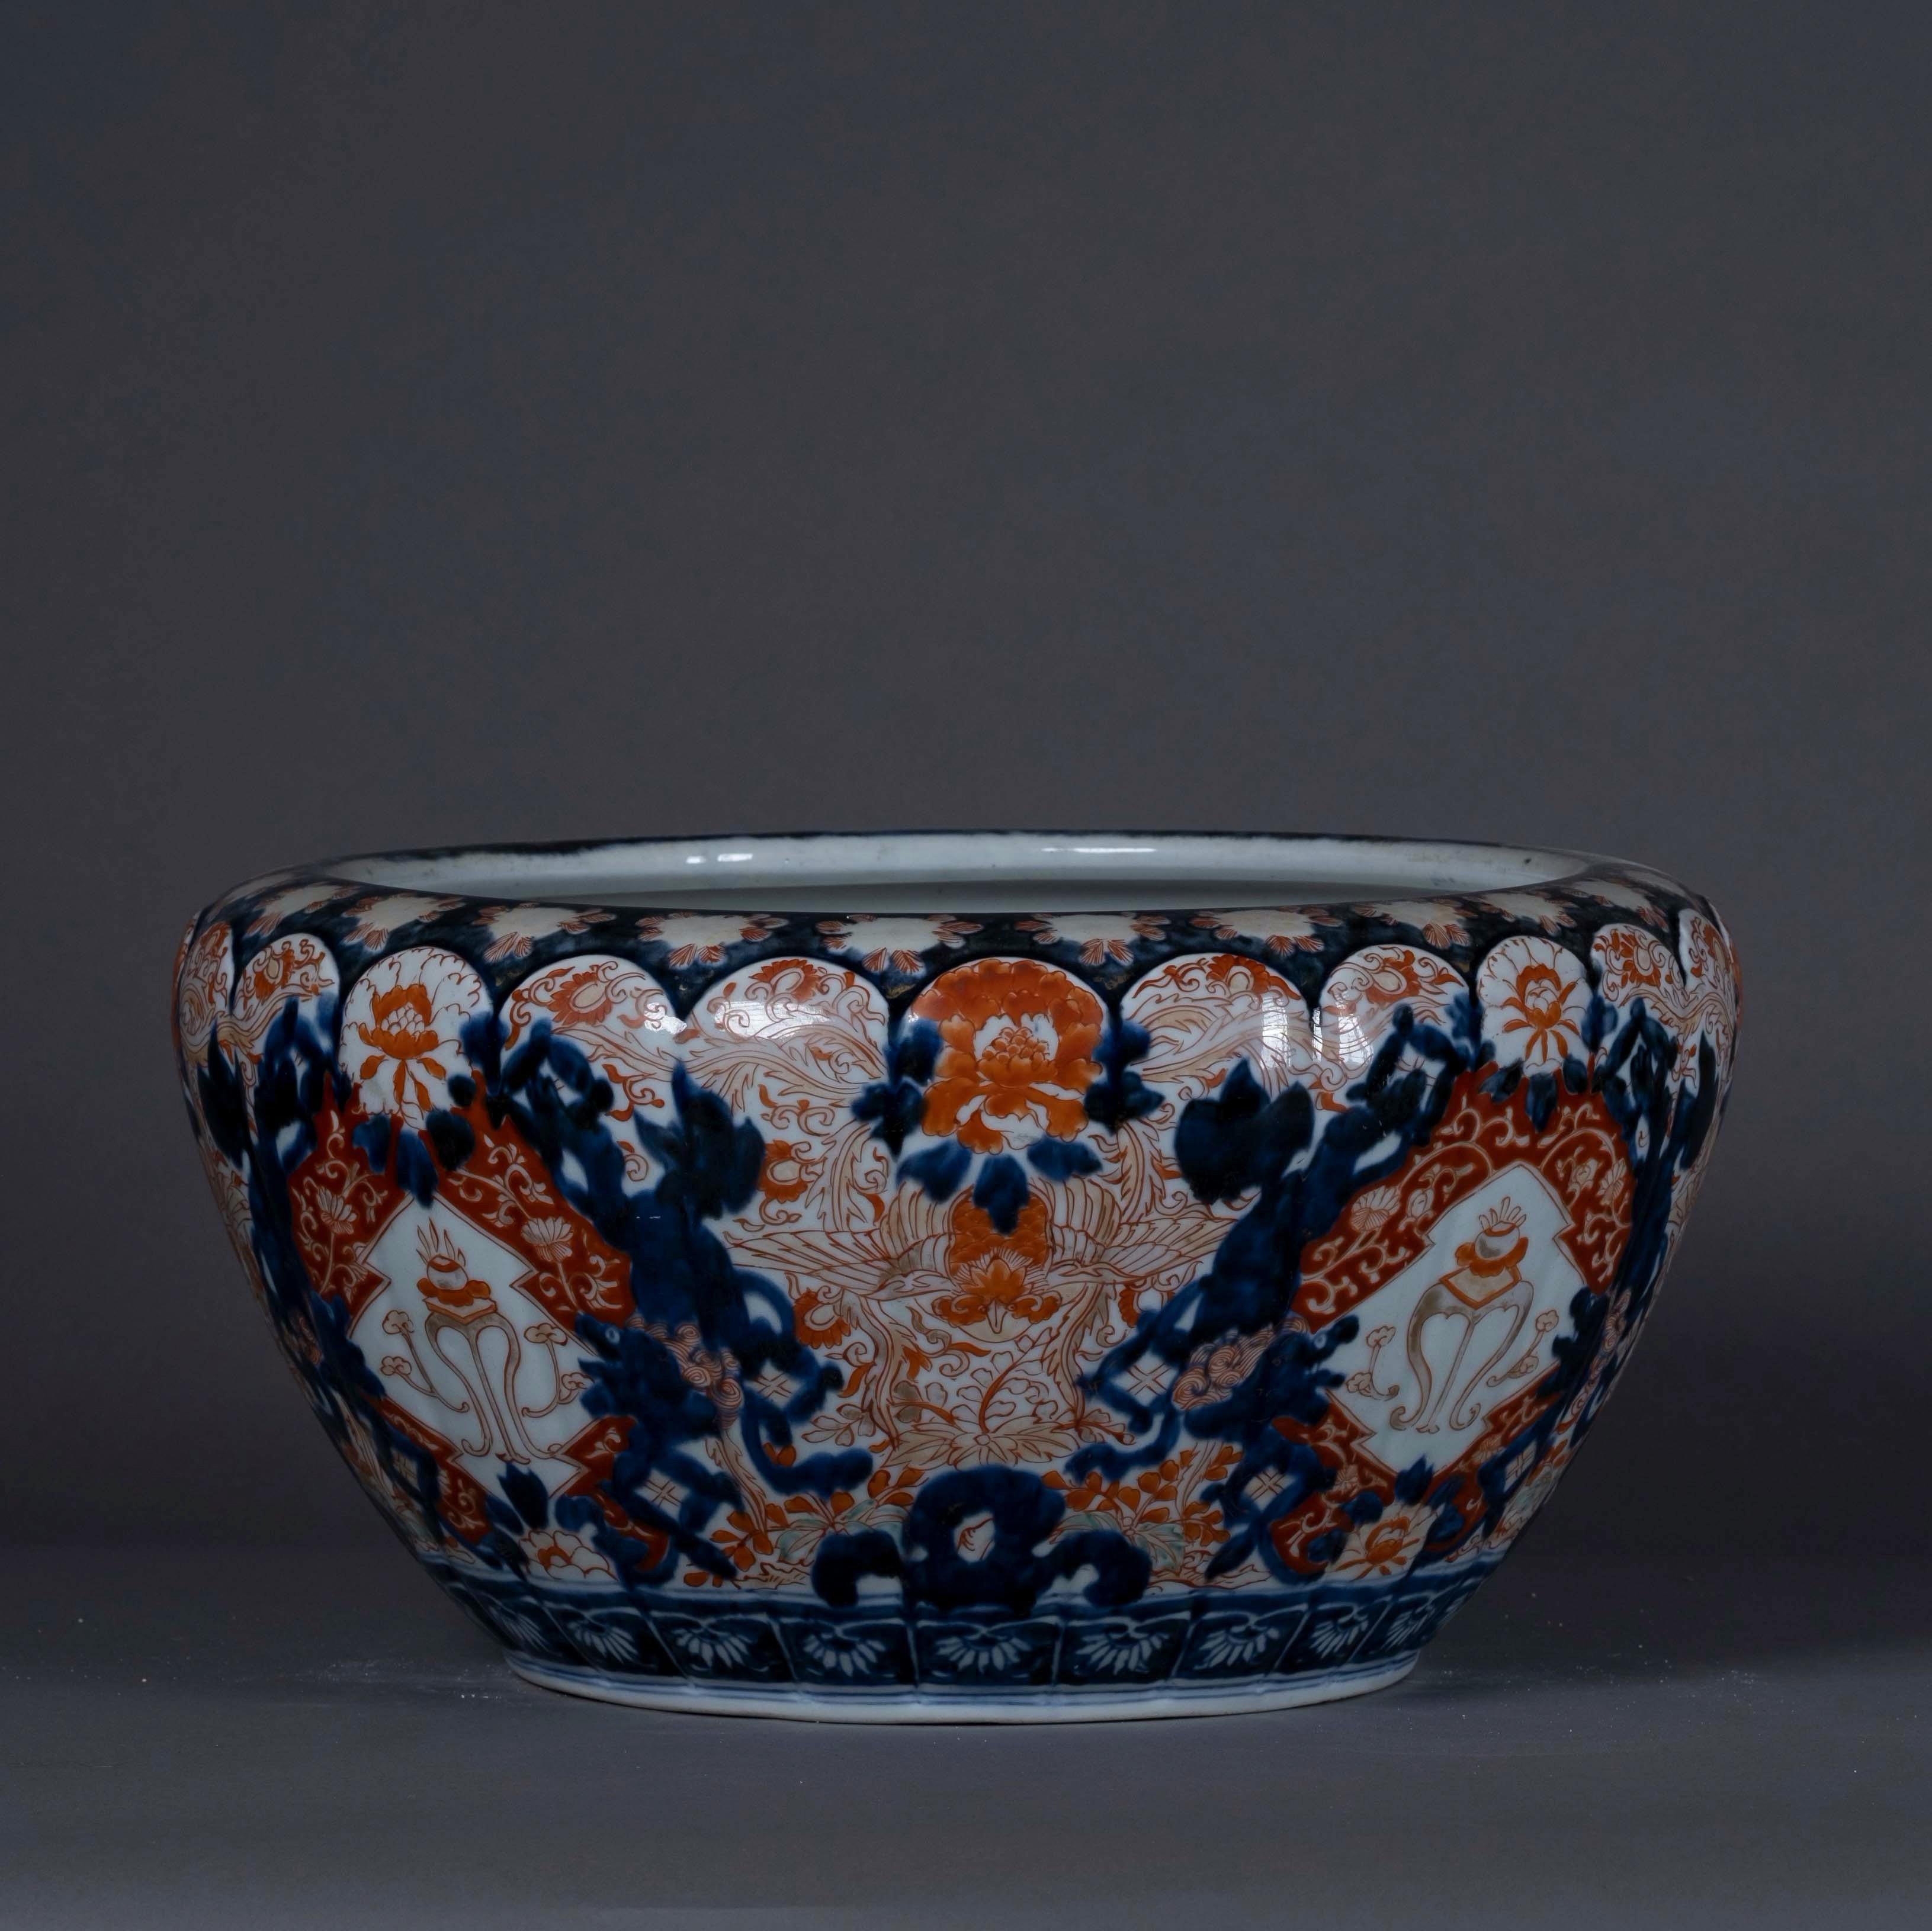 A large 19th century Imari Porcelain bowl, decorated in the traditional manner with foliage and flowers in red, blue and gilt glazes.